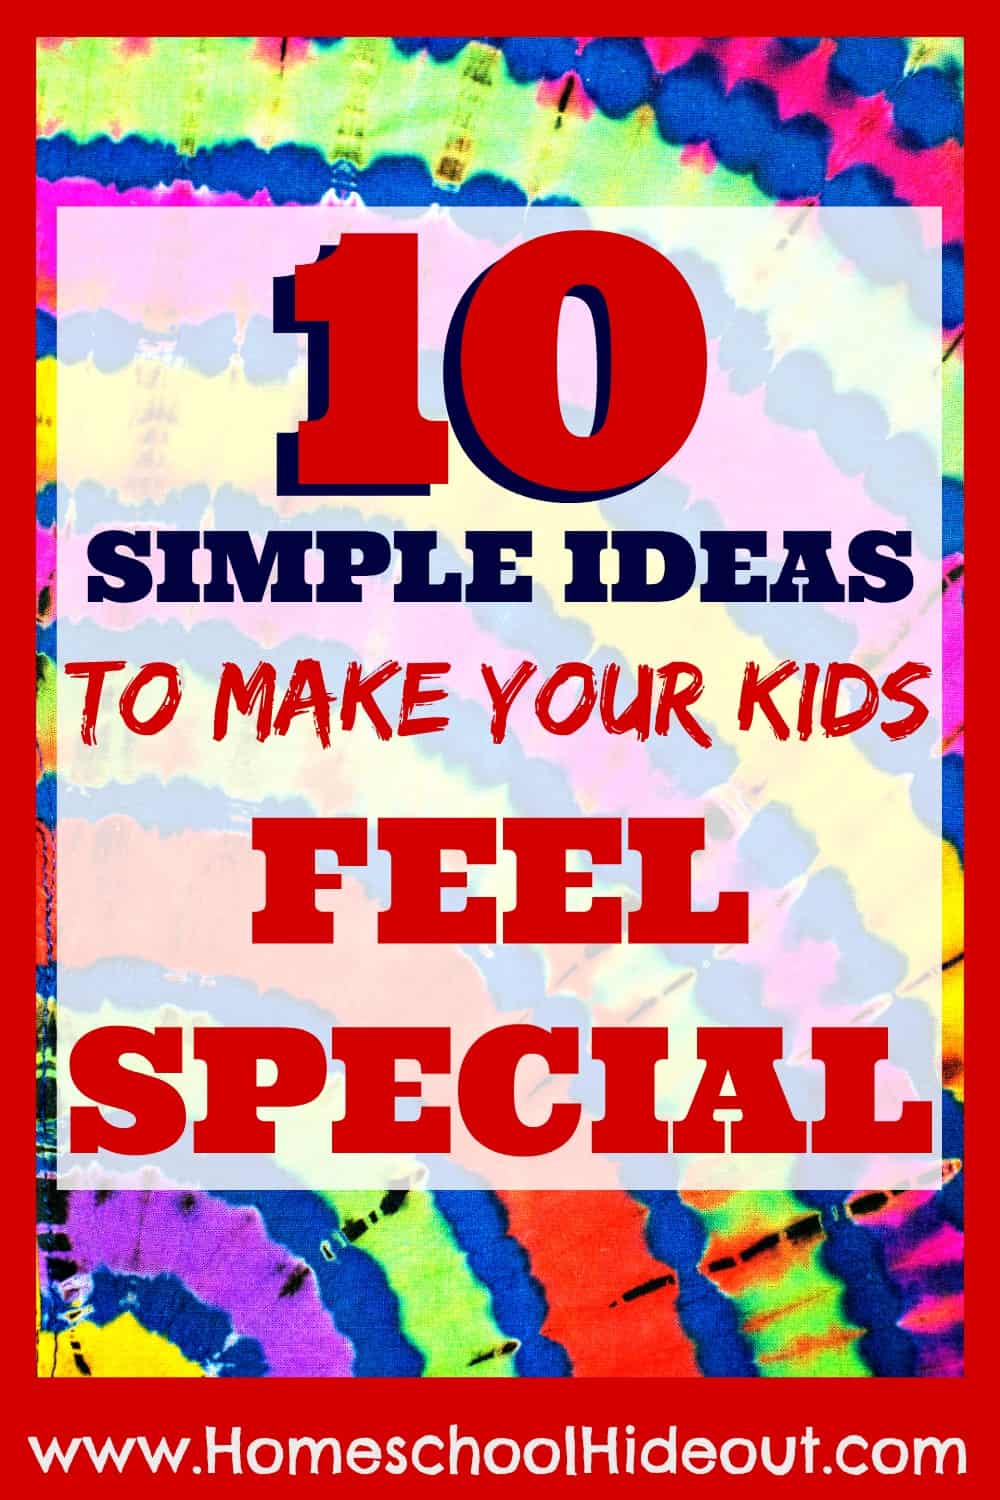 Genius ideas on how to make your kids feel special! I love #4. Gonna go do it right now!